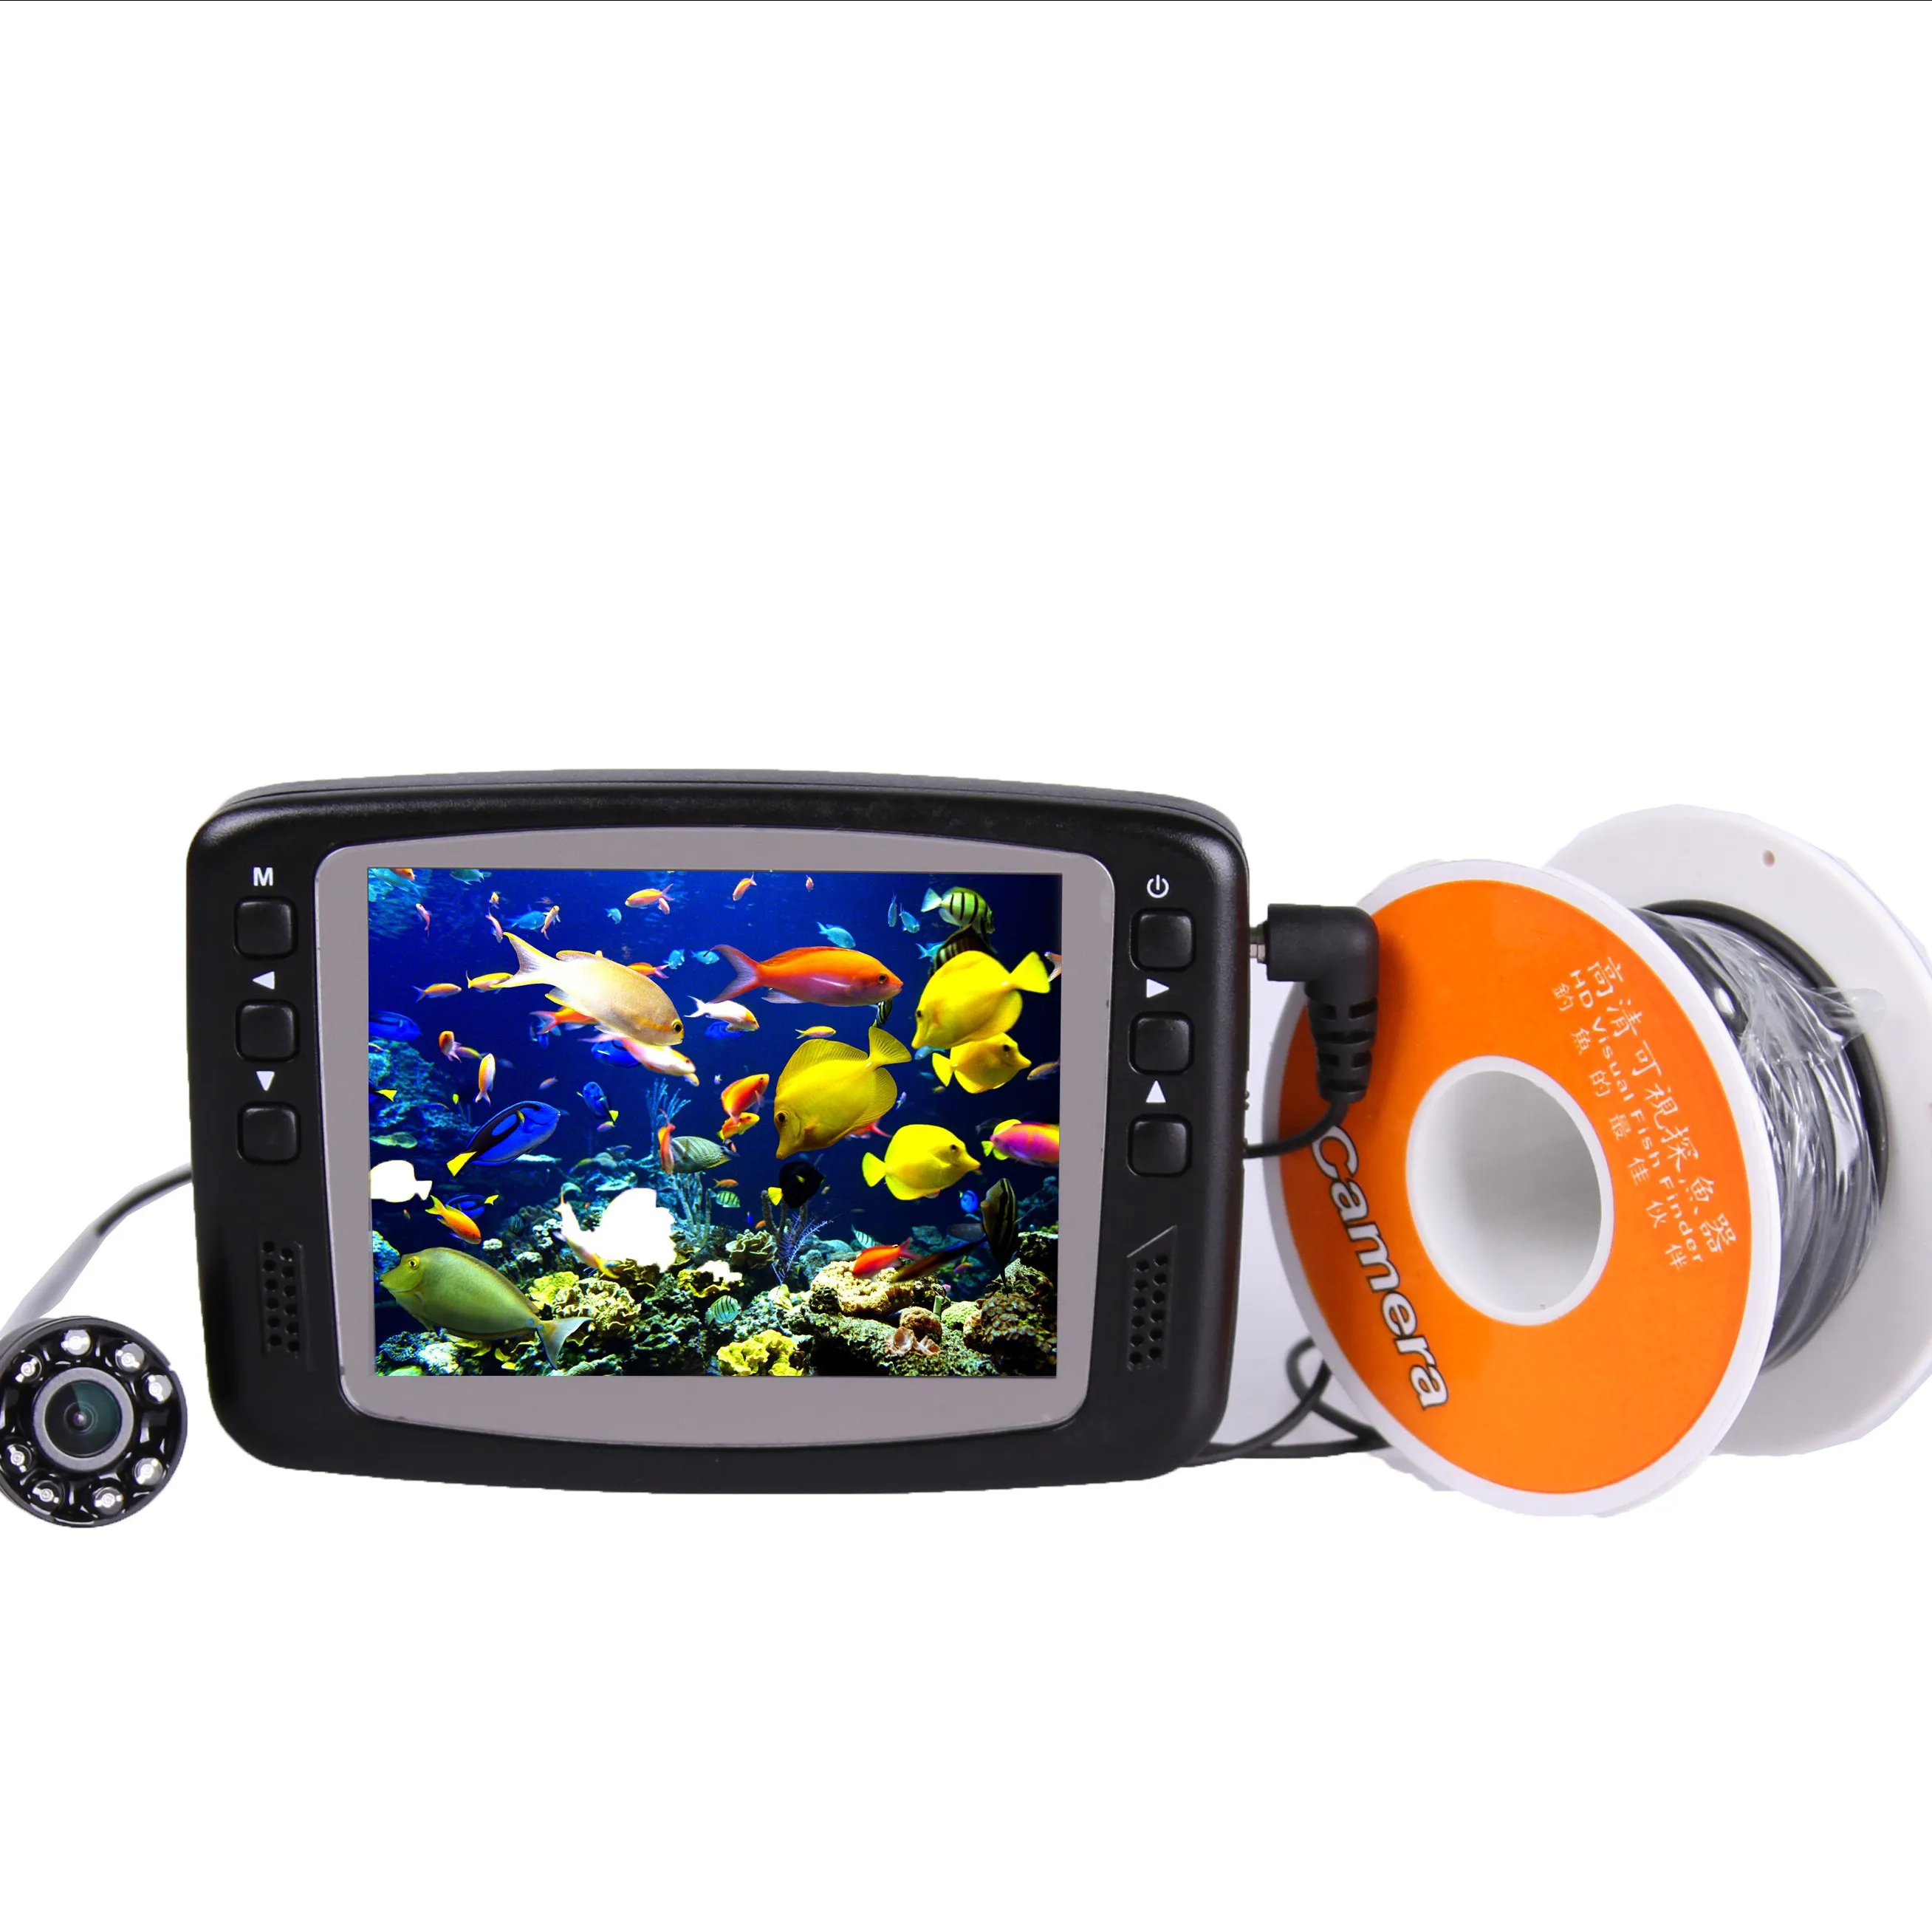 15M Cable Waterproof Fish Finder 3.5" TFT LCD Monitor Underwater Fishing Video Camera System